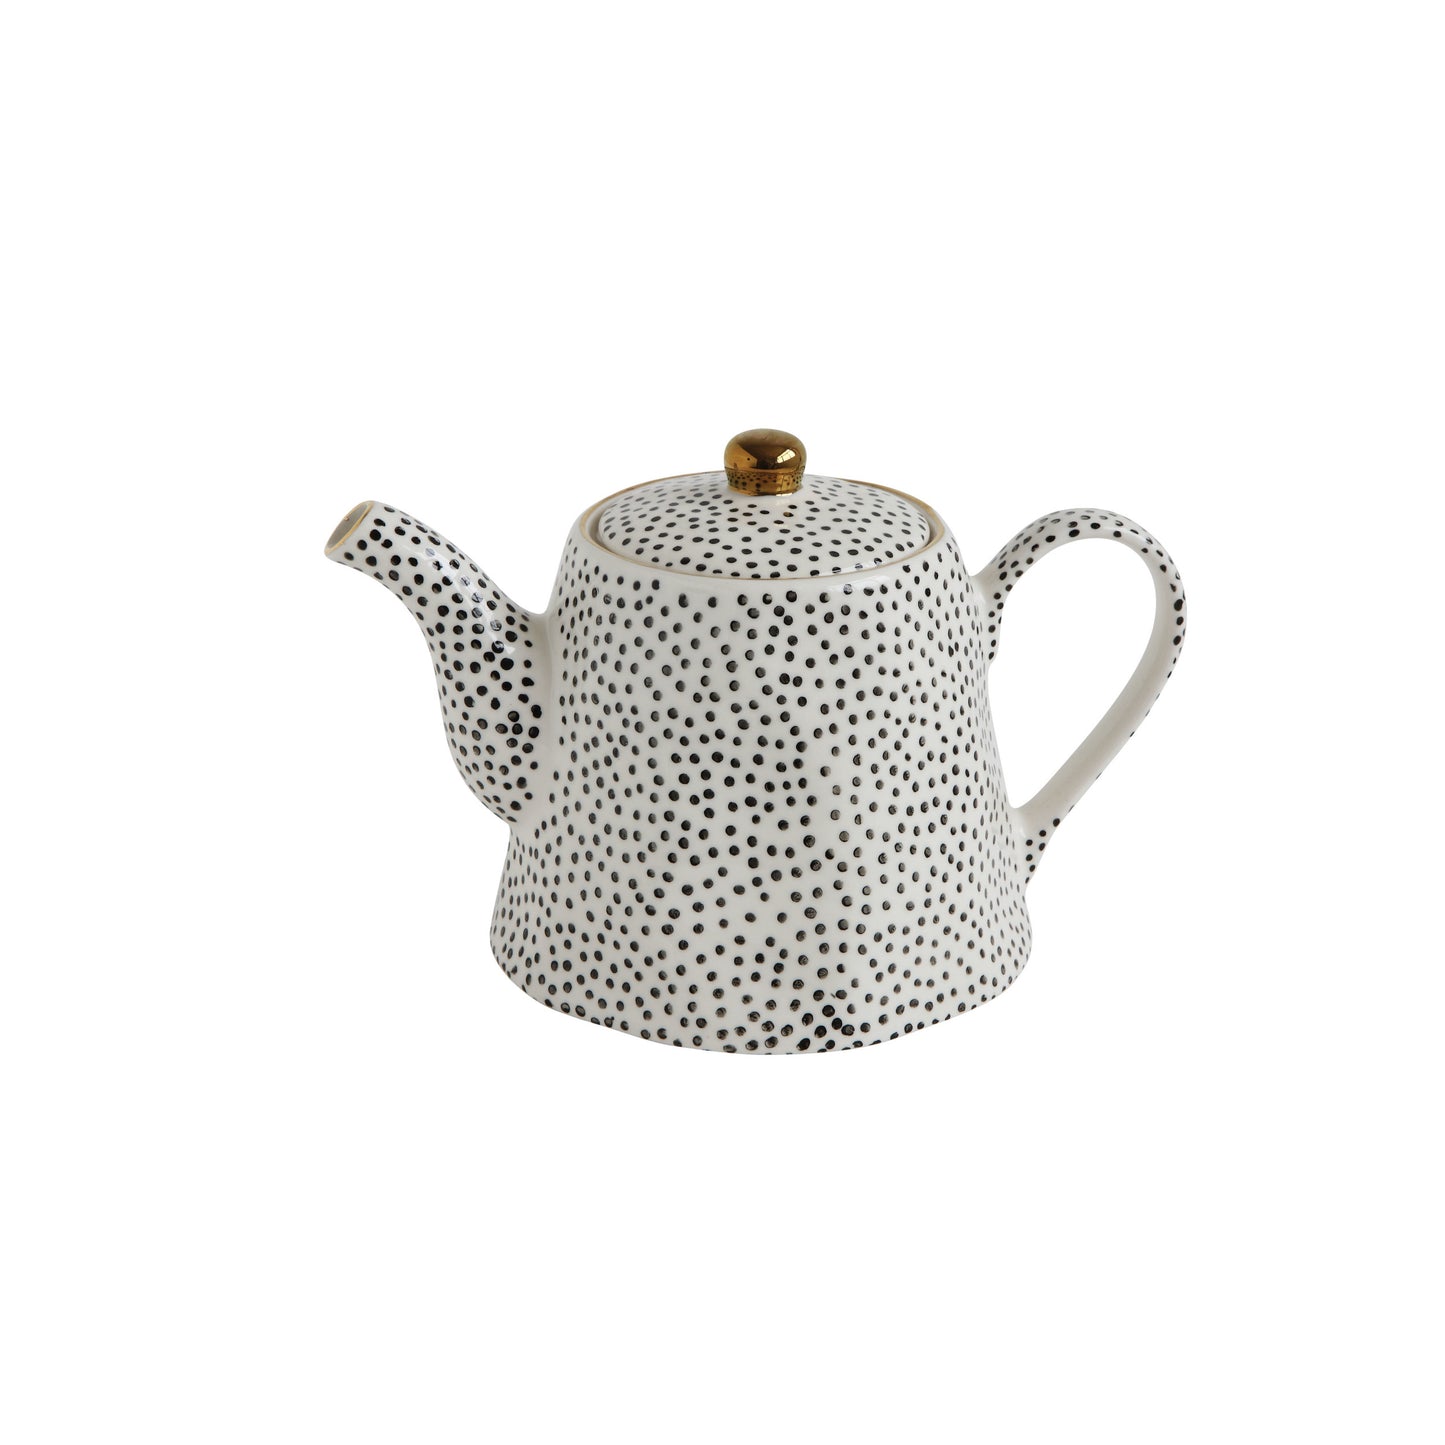 Stoneware Teapot with Dots